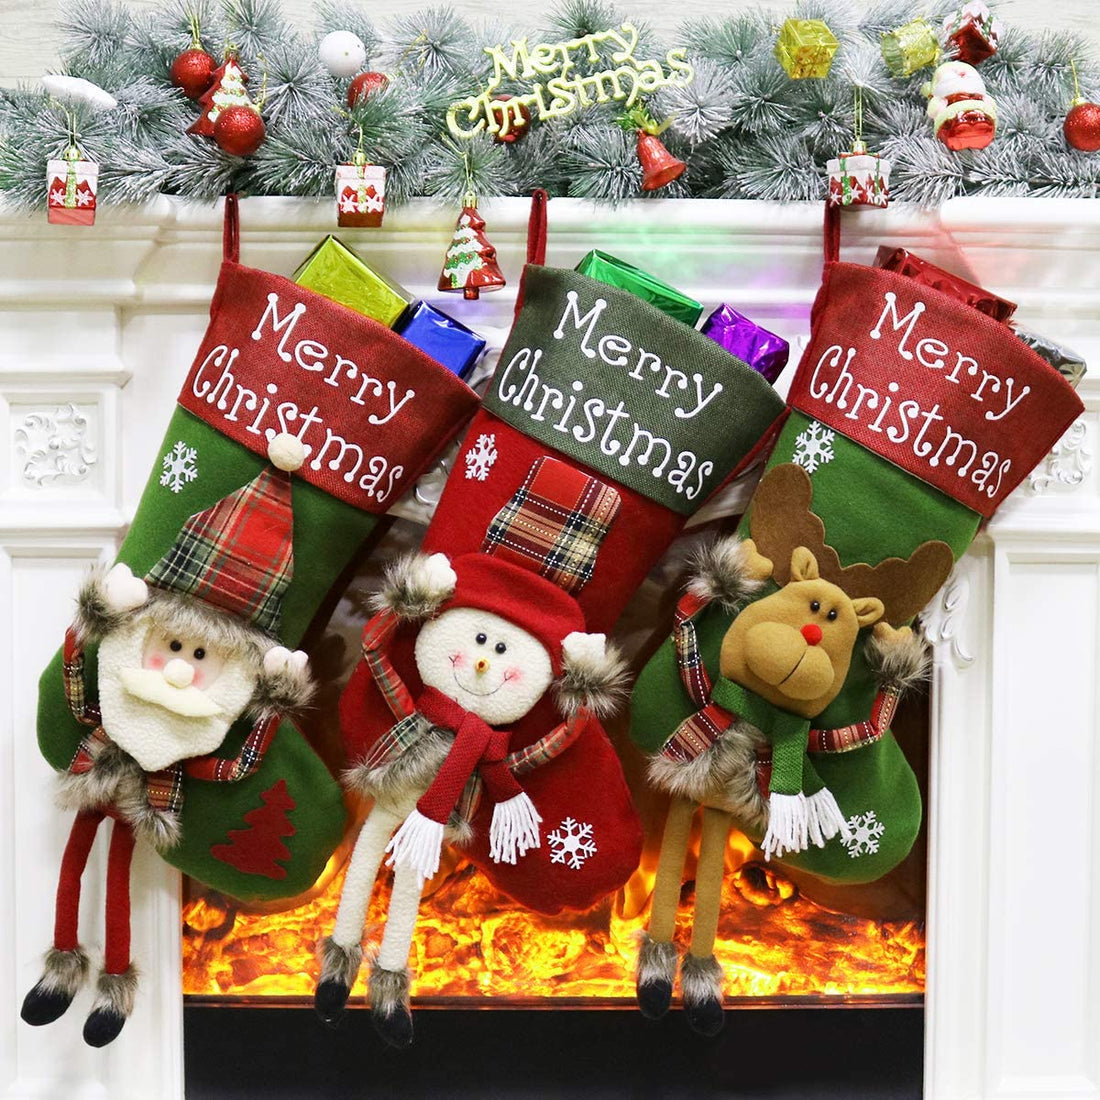 Prepare Your House for the Season of Giving With These Festive Christmas Stockings